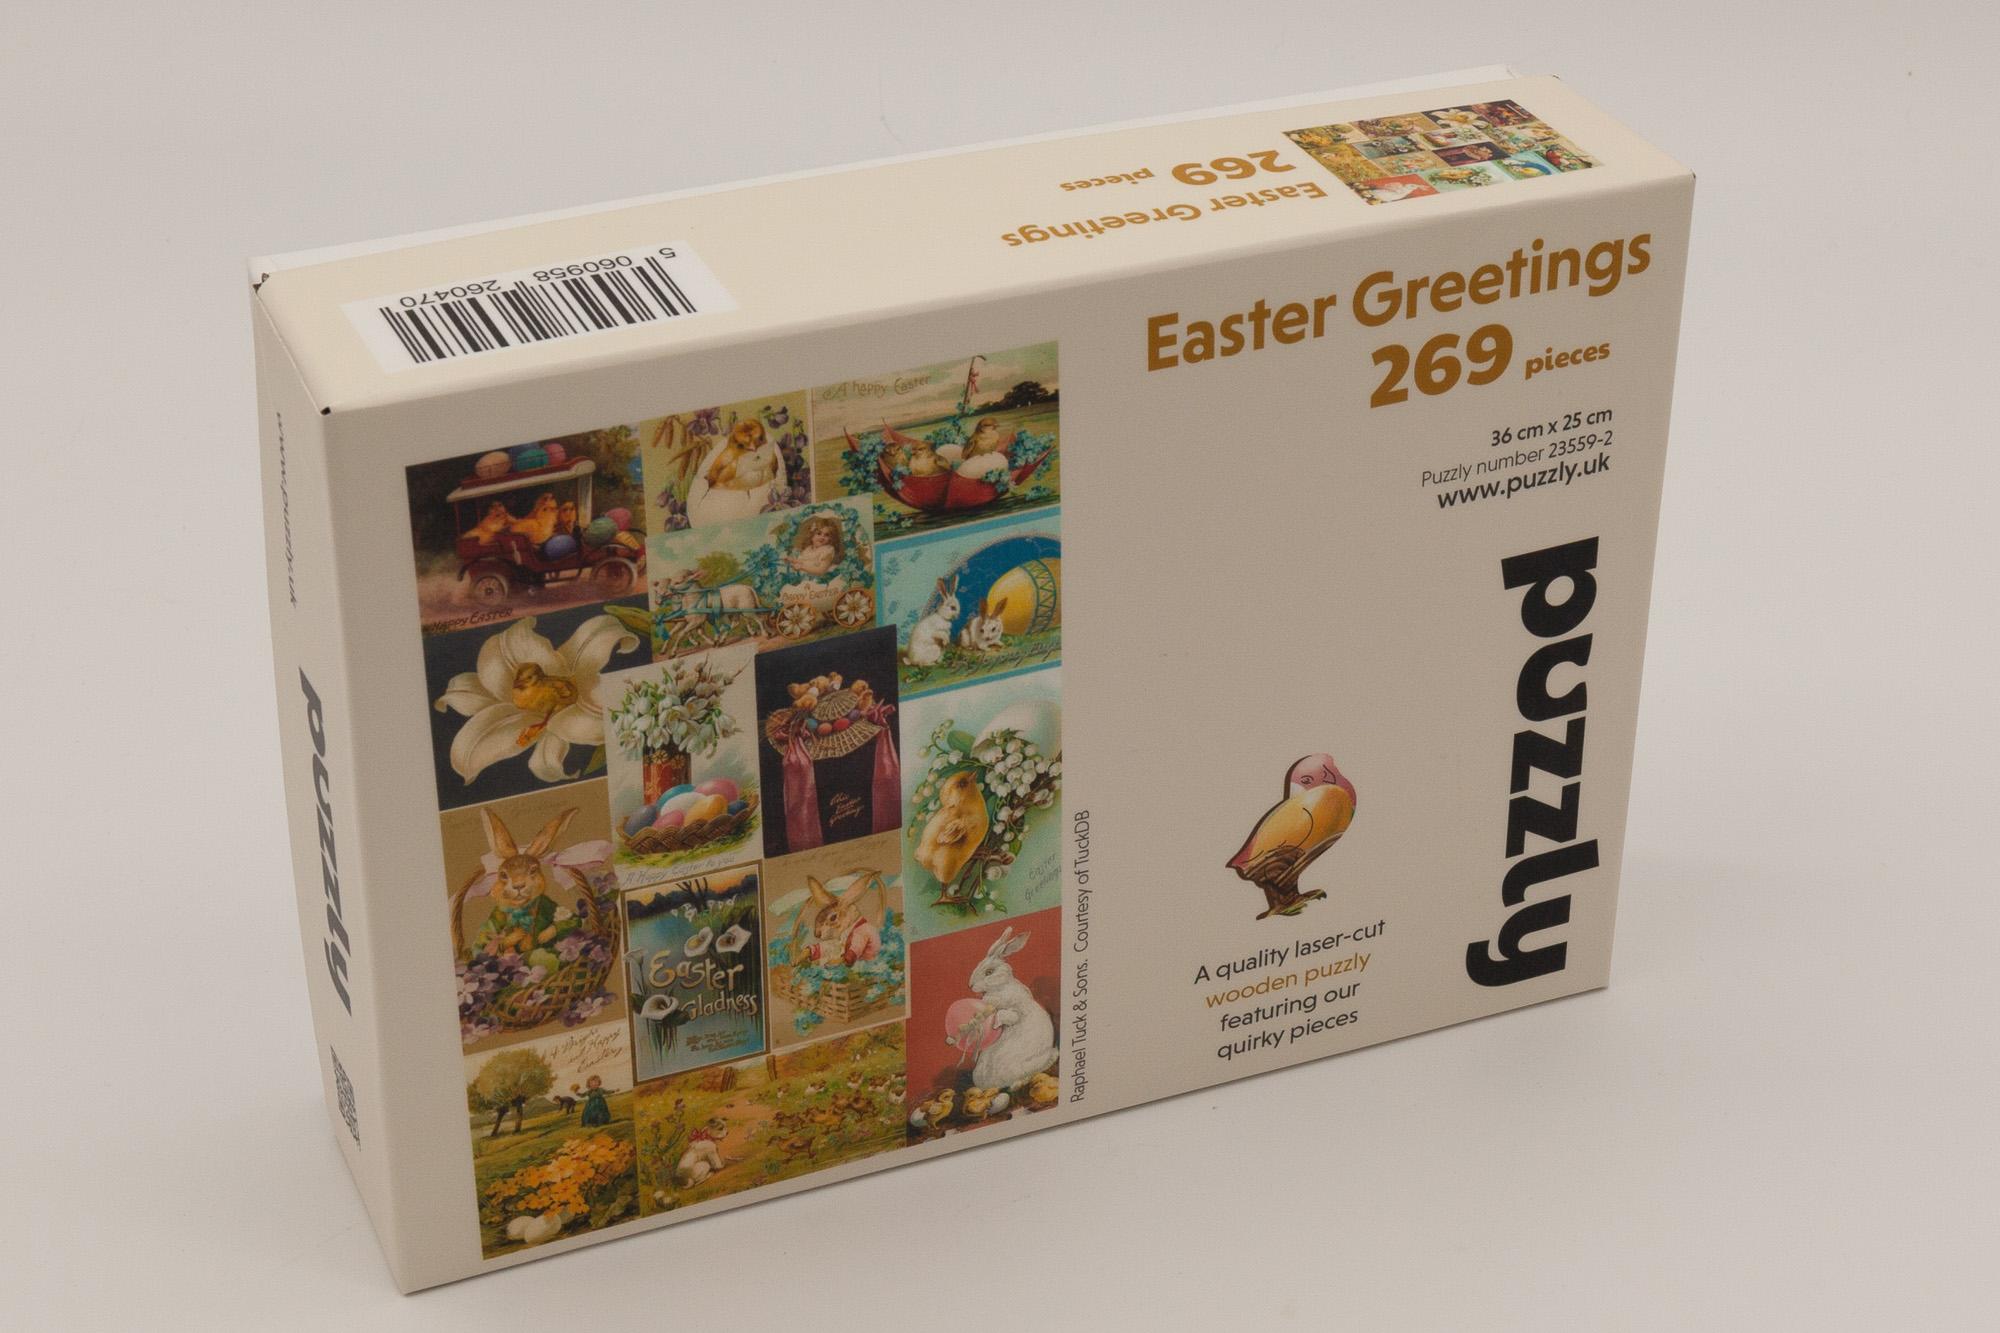 Puzzly Easter Greeting Wooden Jigsaw Puzzle